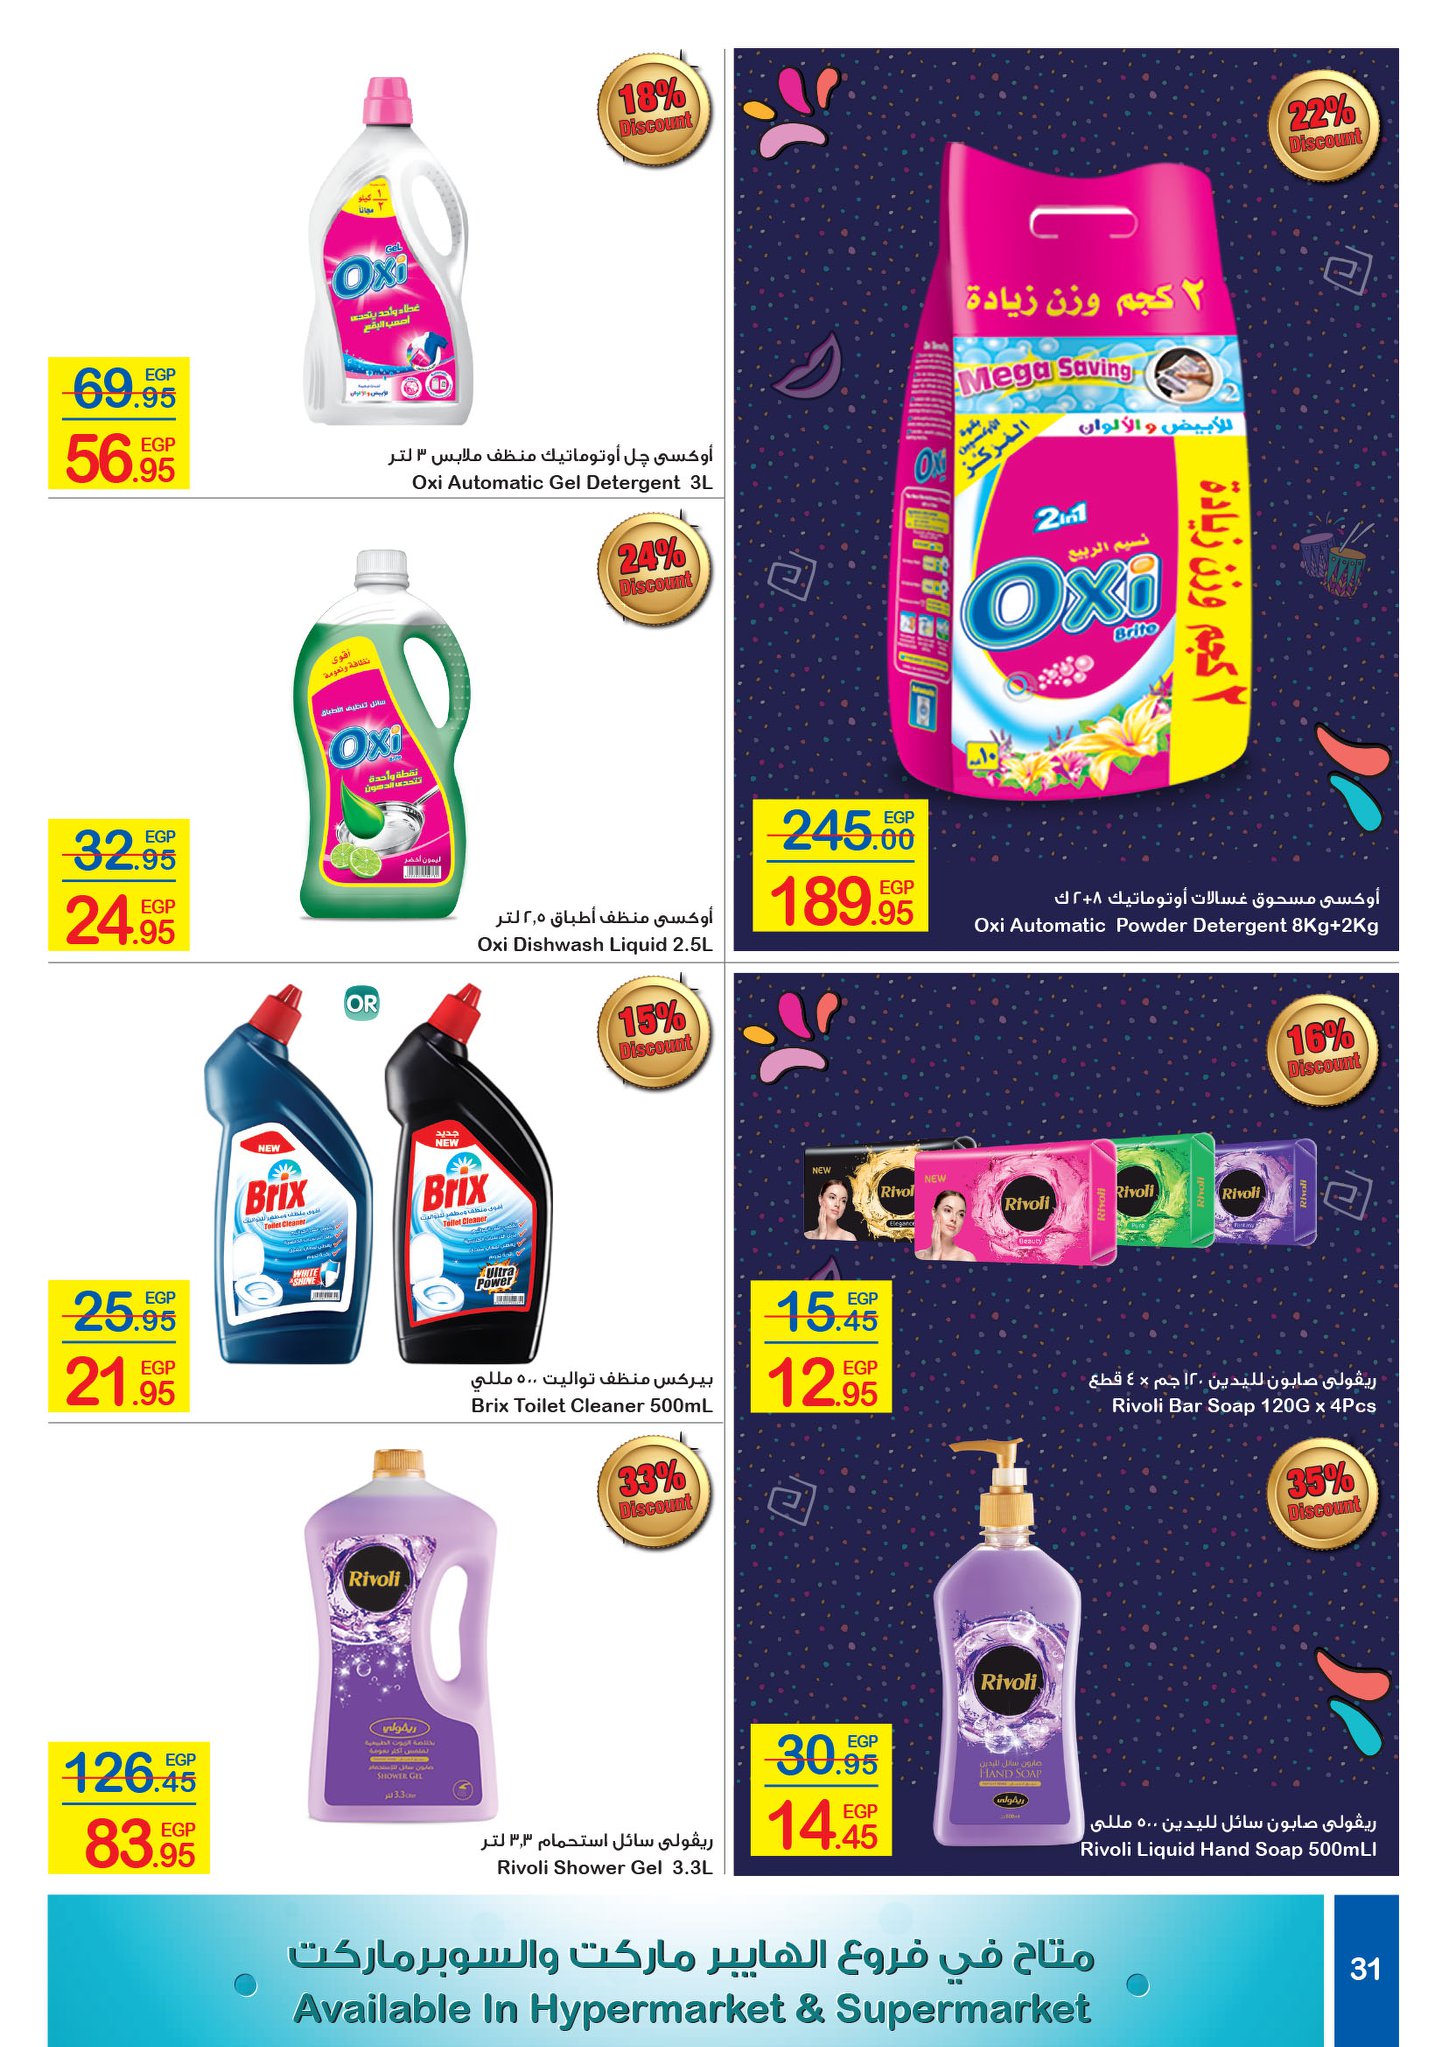 Carrefour Flyer from 16/7 till 27/7 | Carrefour Egypt 31